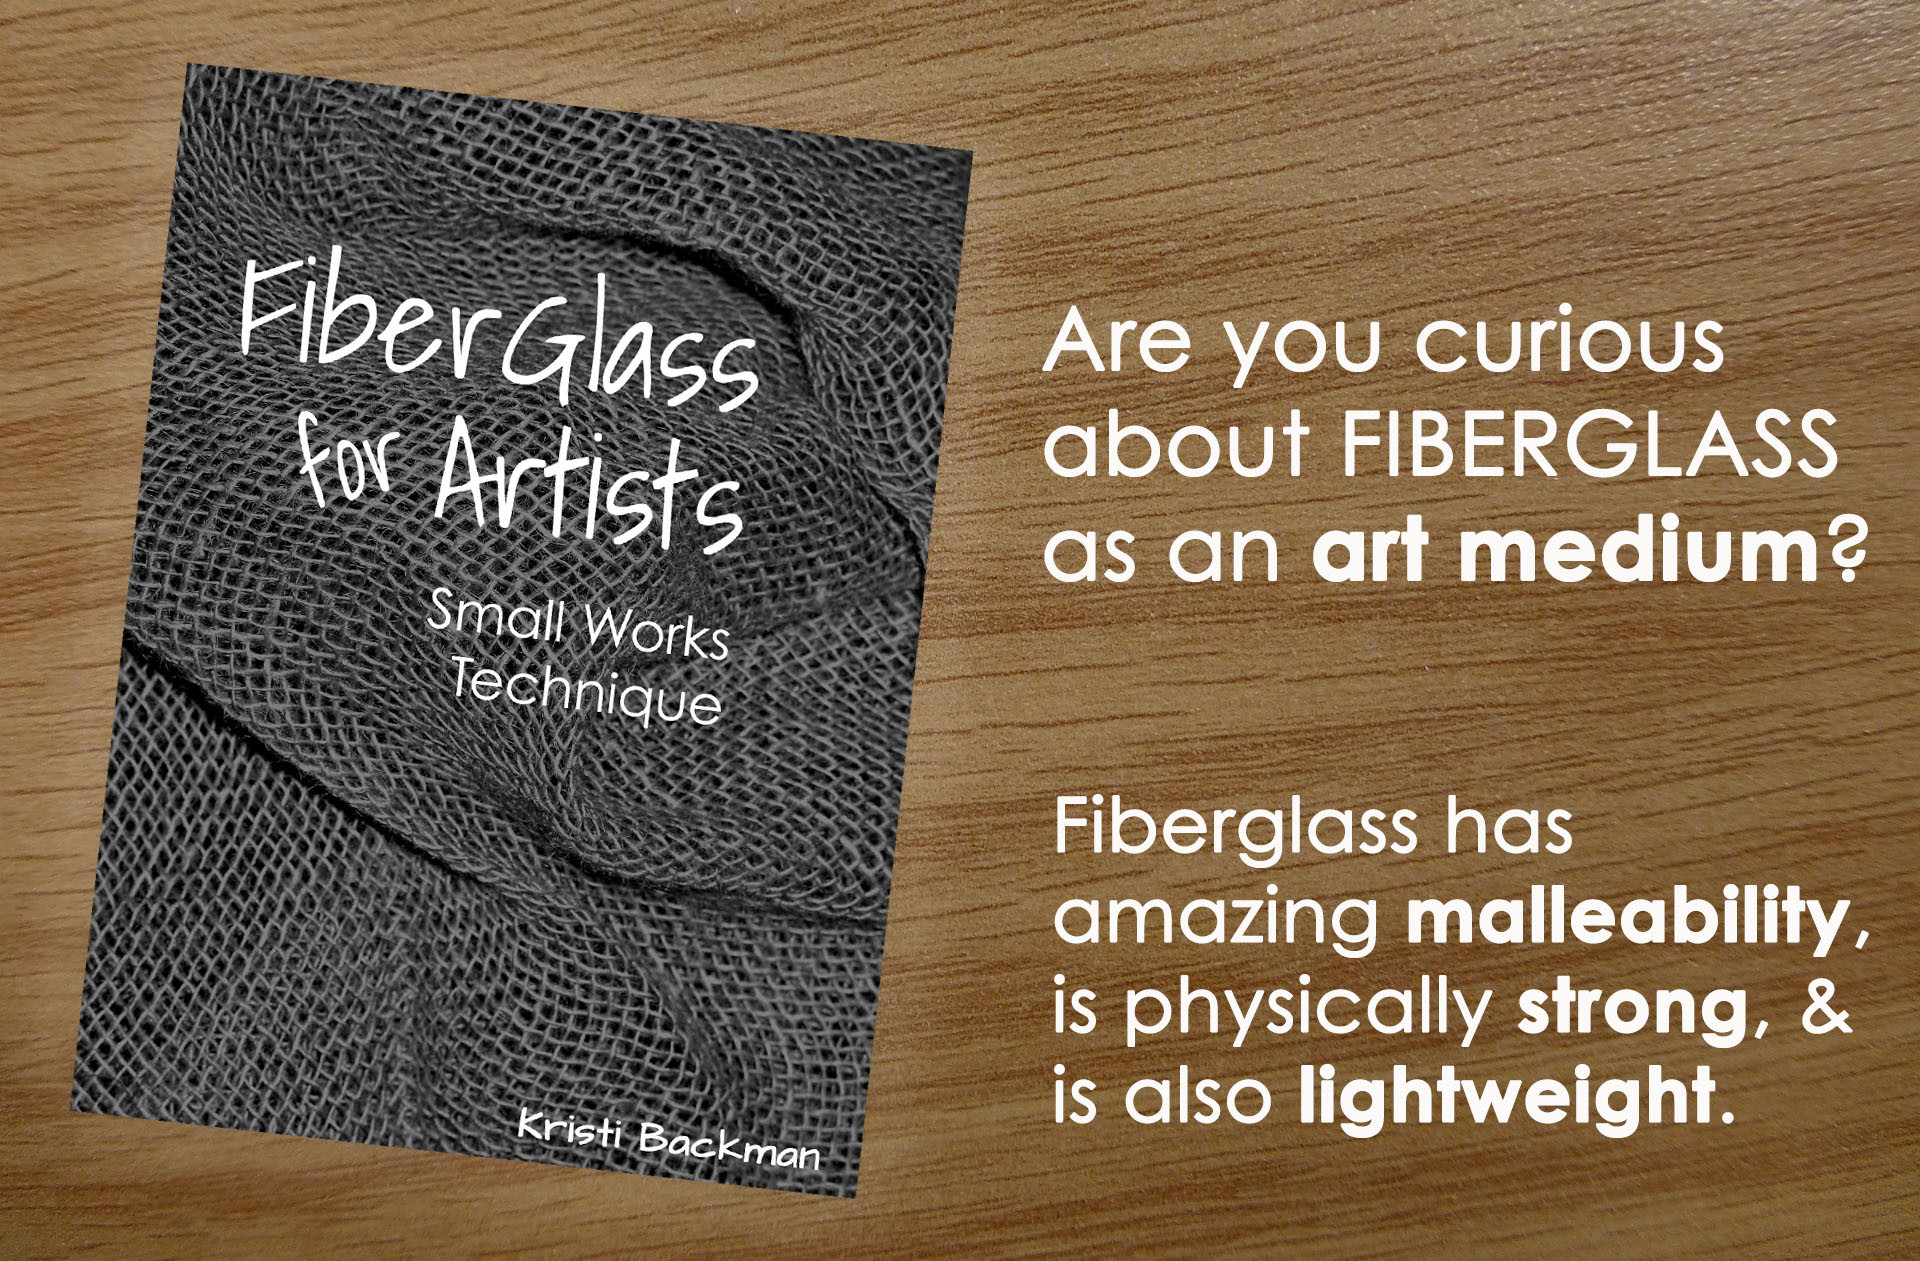 picture of book "Fiberglass: Technique for Small Works"  on wood table